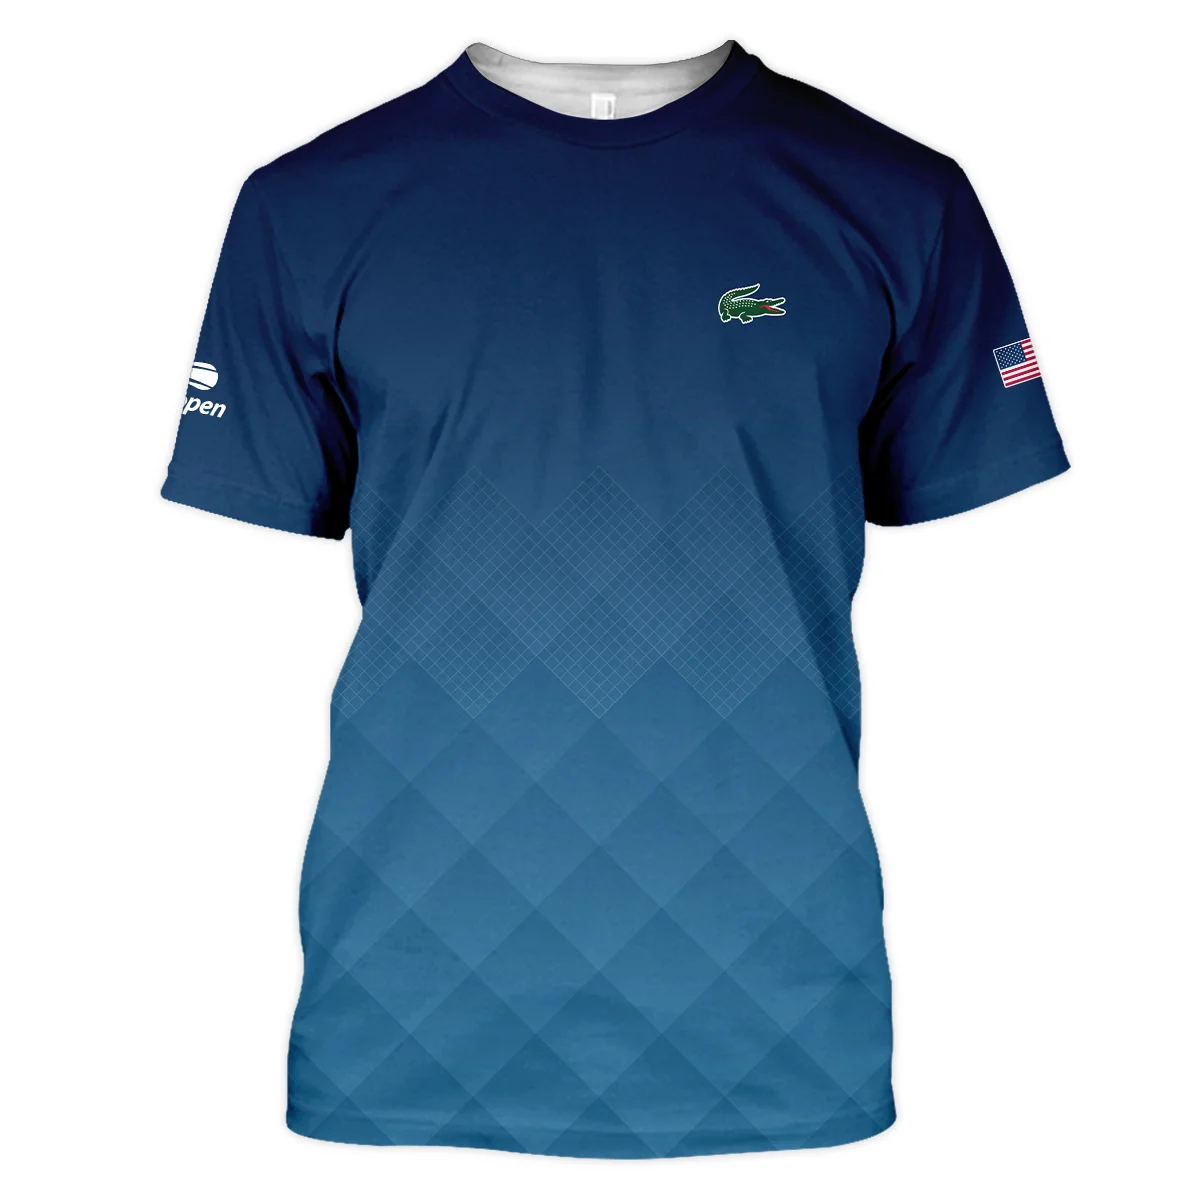 Lacoste Blue Abstract Background US Open Tennis Champions Zipper Polo Shirt Style Classic Zipper Polo Shirt For Men